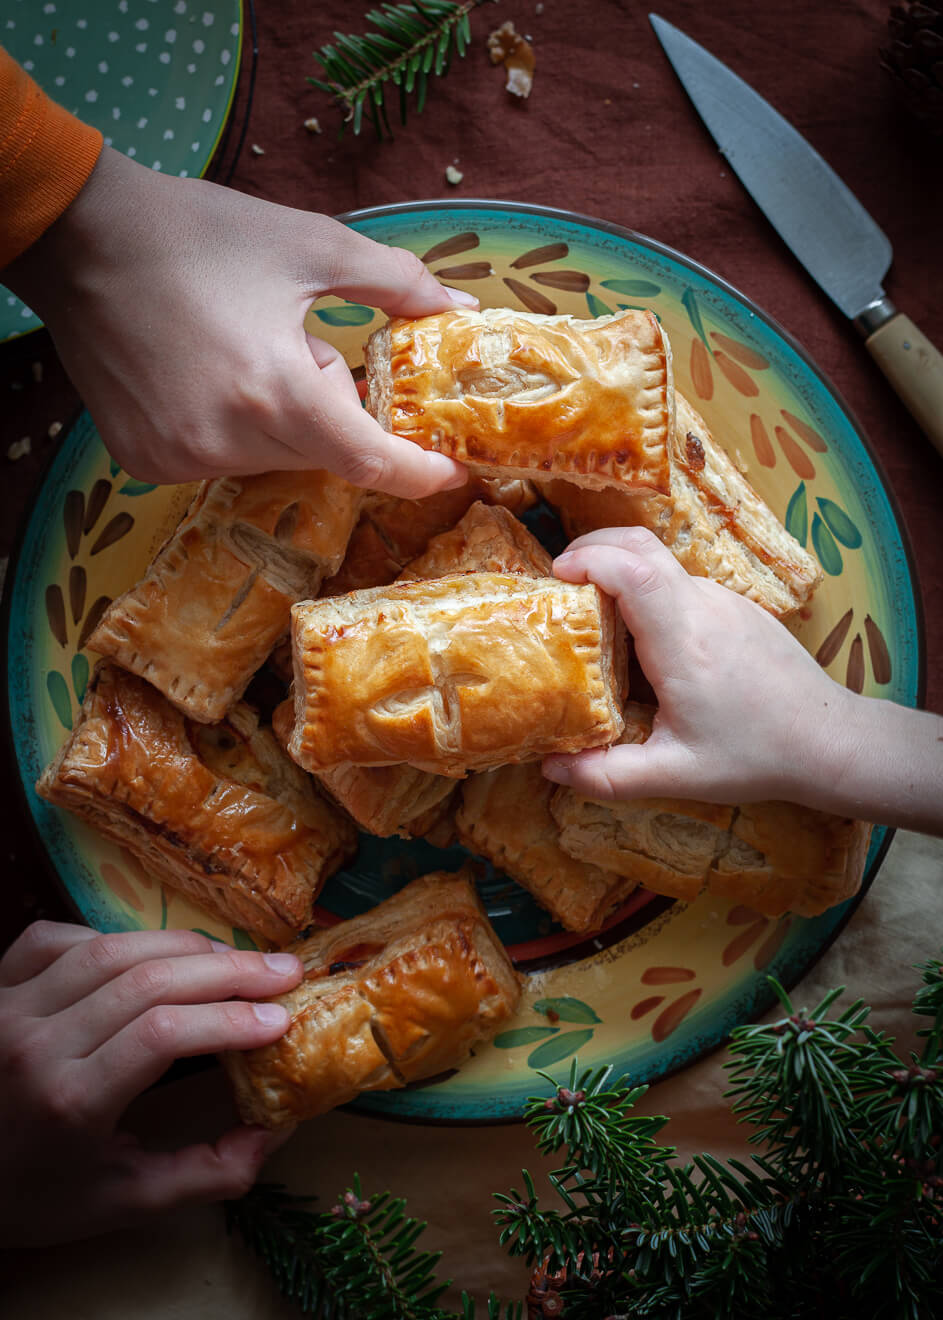 Savory pastries with homemade puff pastry